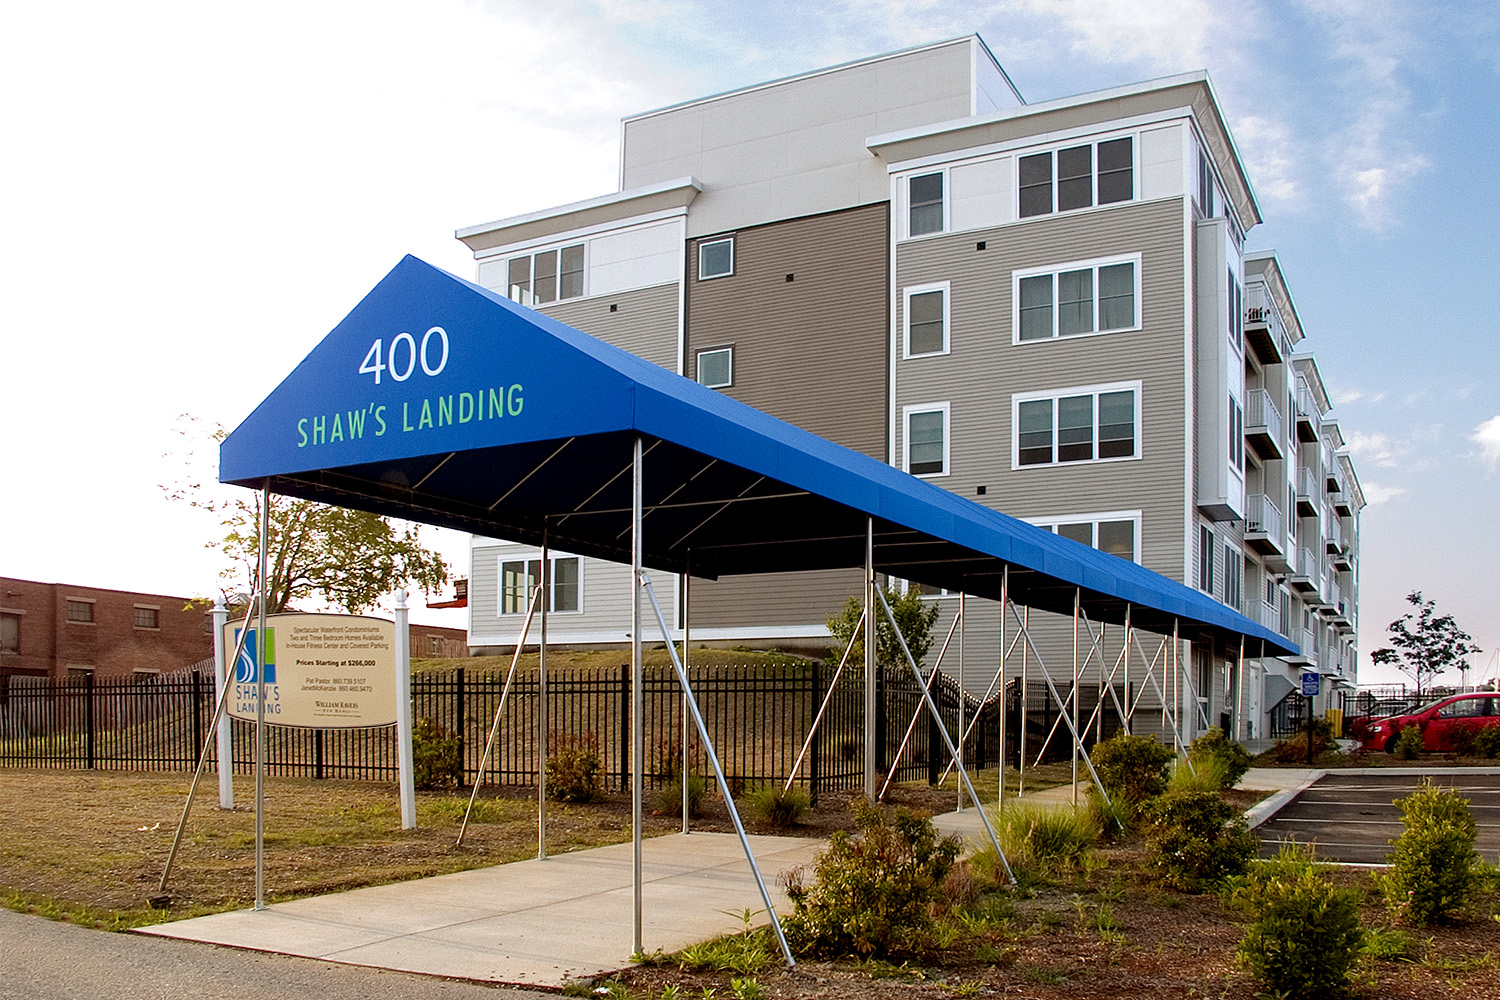 Sideview of building, with long blue tent propped over walkway to entrance 